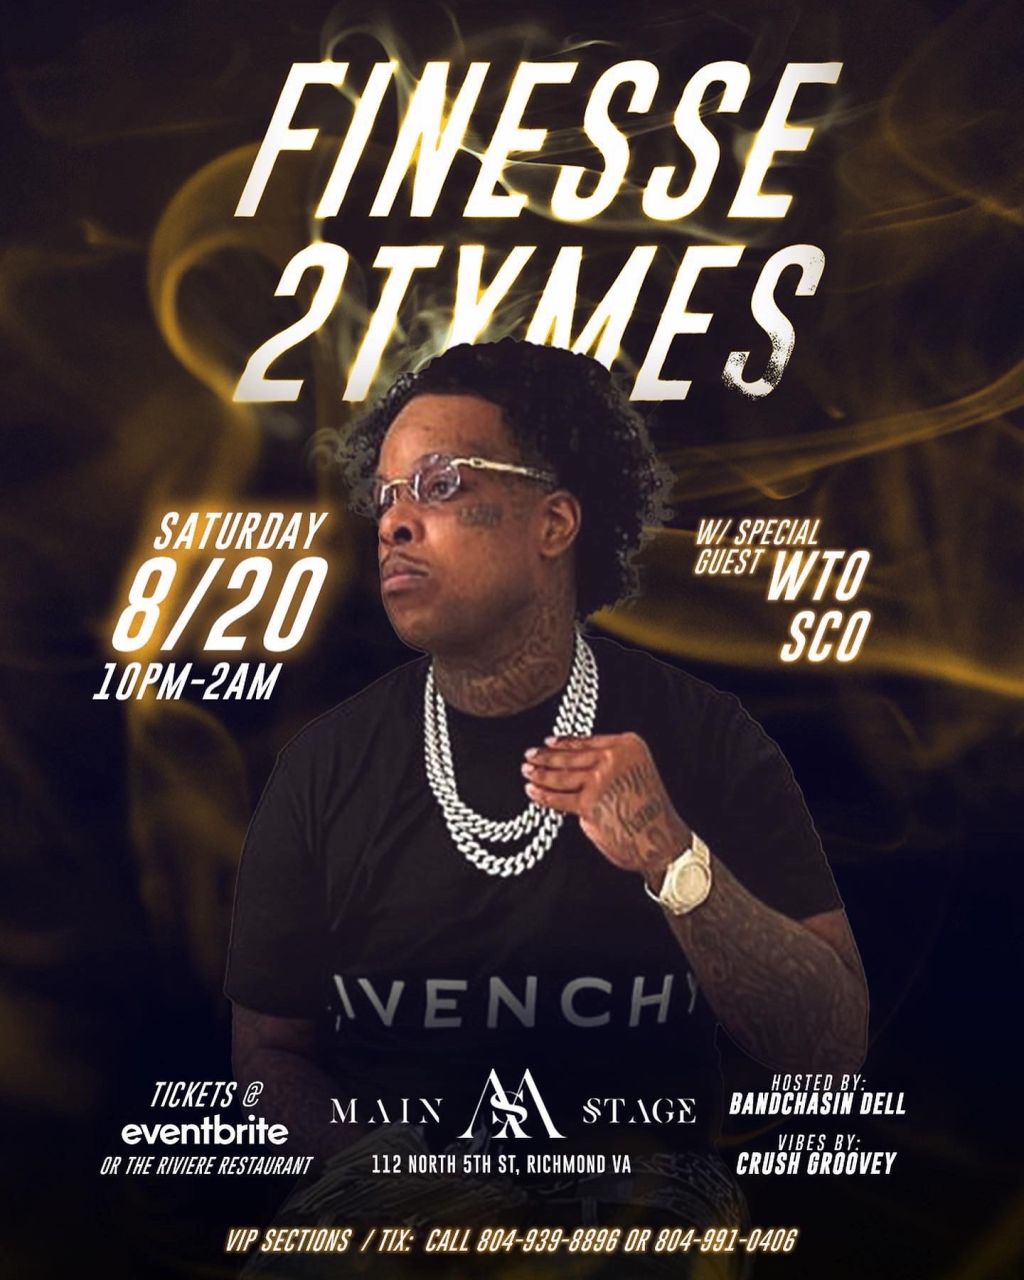 Finesse 2Tymes